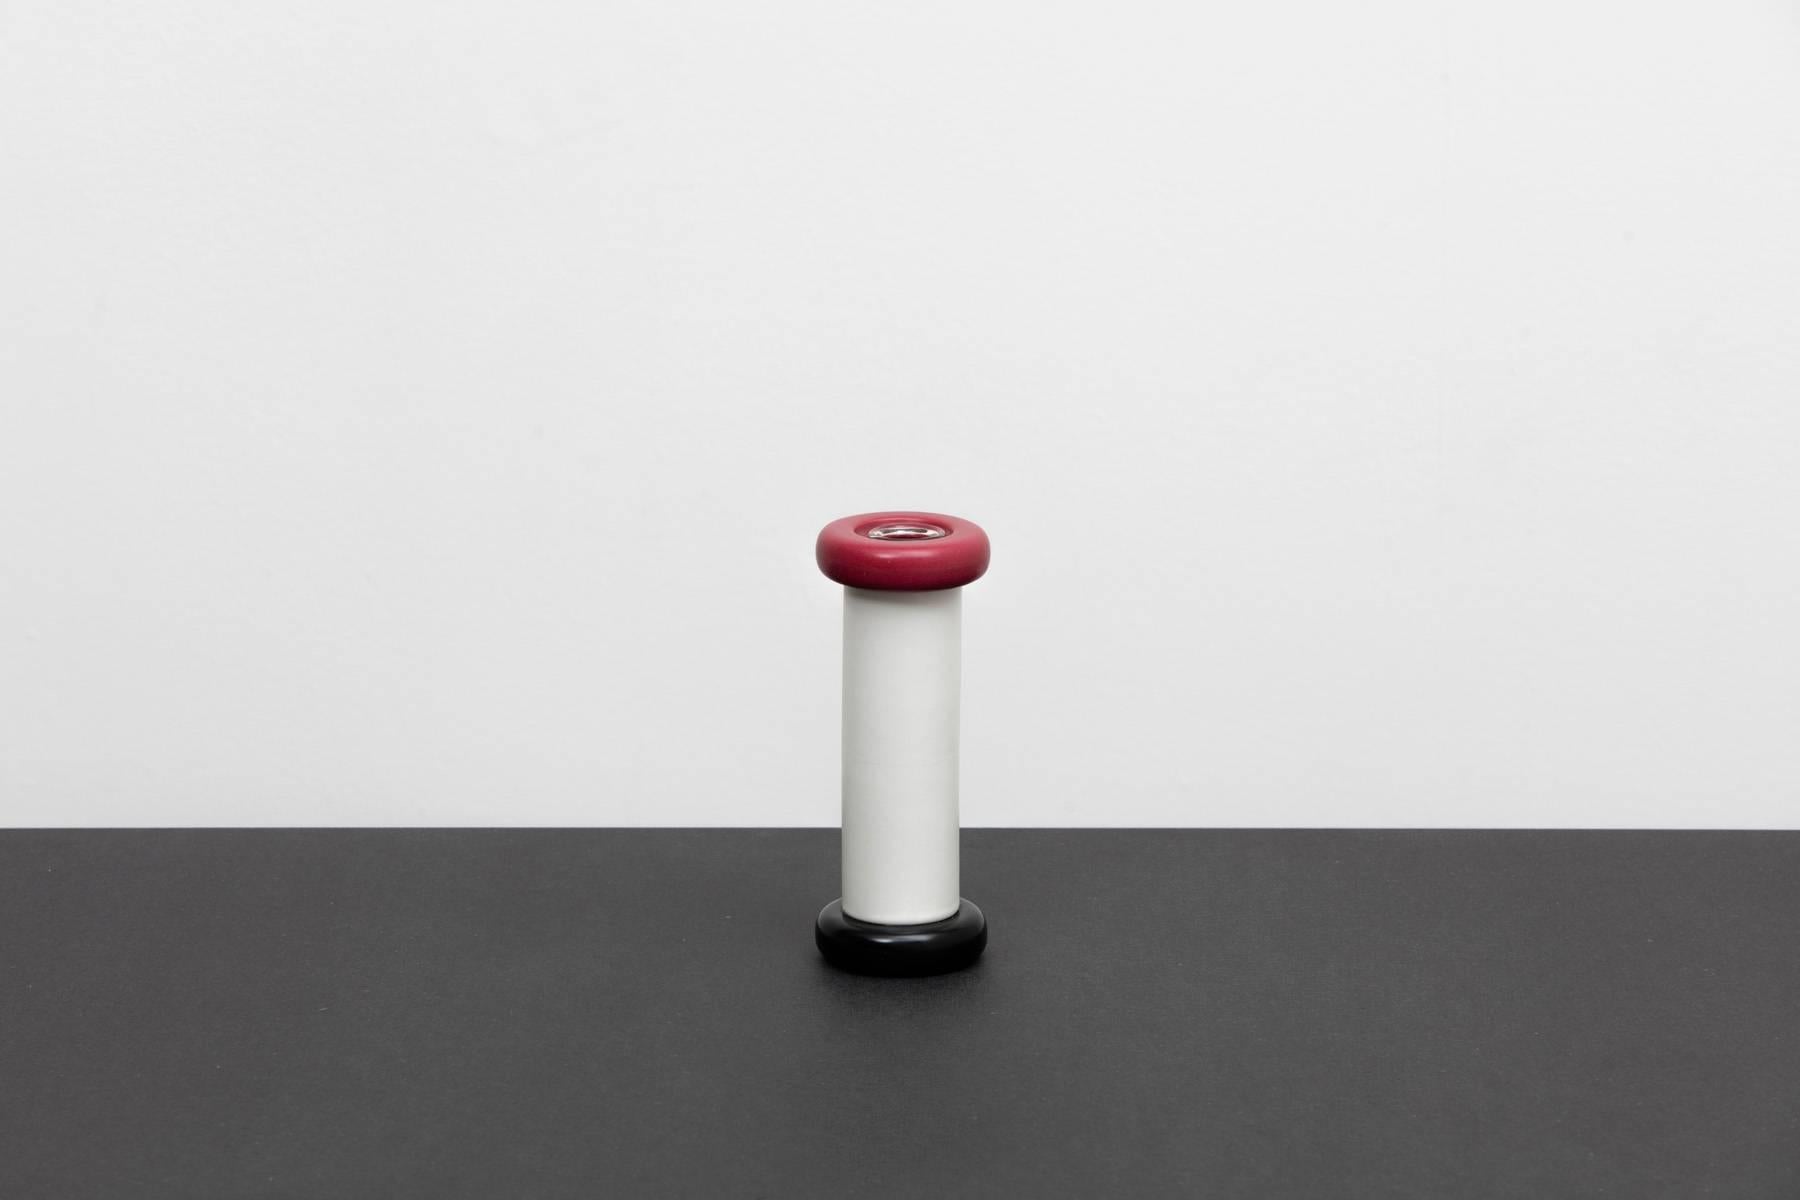 Designed in 1959 but produced much later by the famous and rare Tendentse in 1988. The Vaso a Rocchetto is one of the smallest if not the smallest vase from Ettore Sottsass. We first thought that this vase was from the 90 pieces edition. Through our